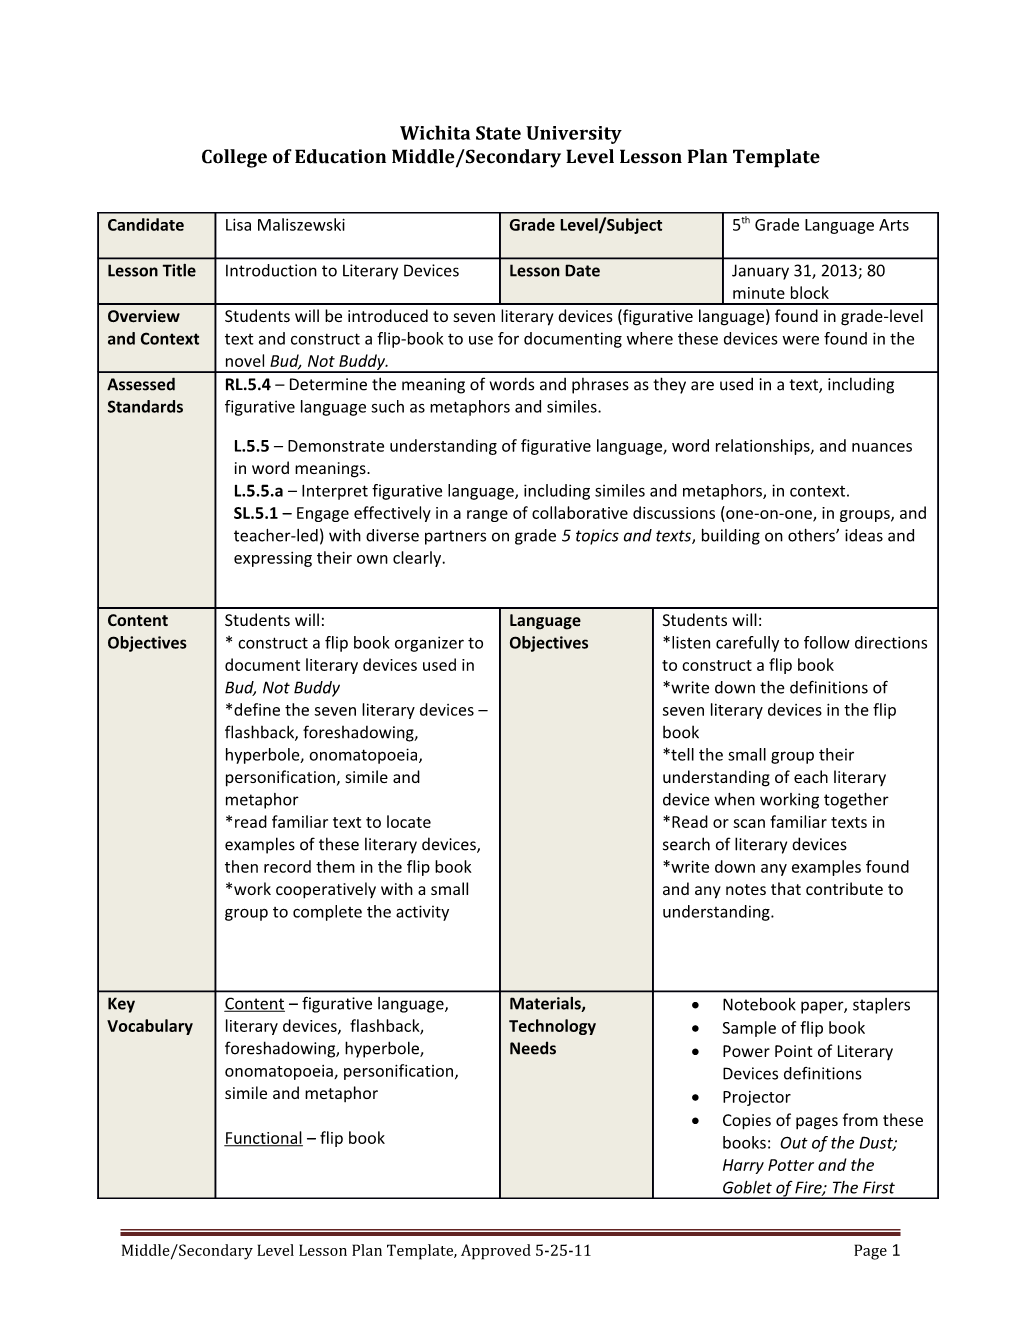 College of Education Middle/Secondary Level Lesson Plan Template